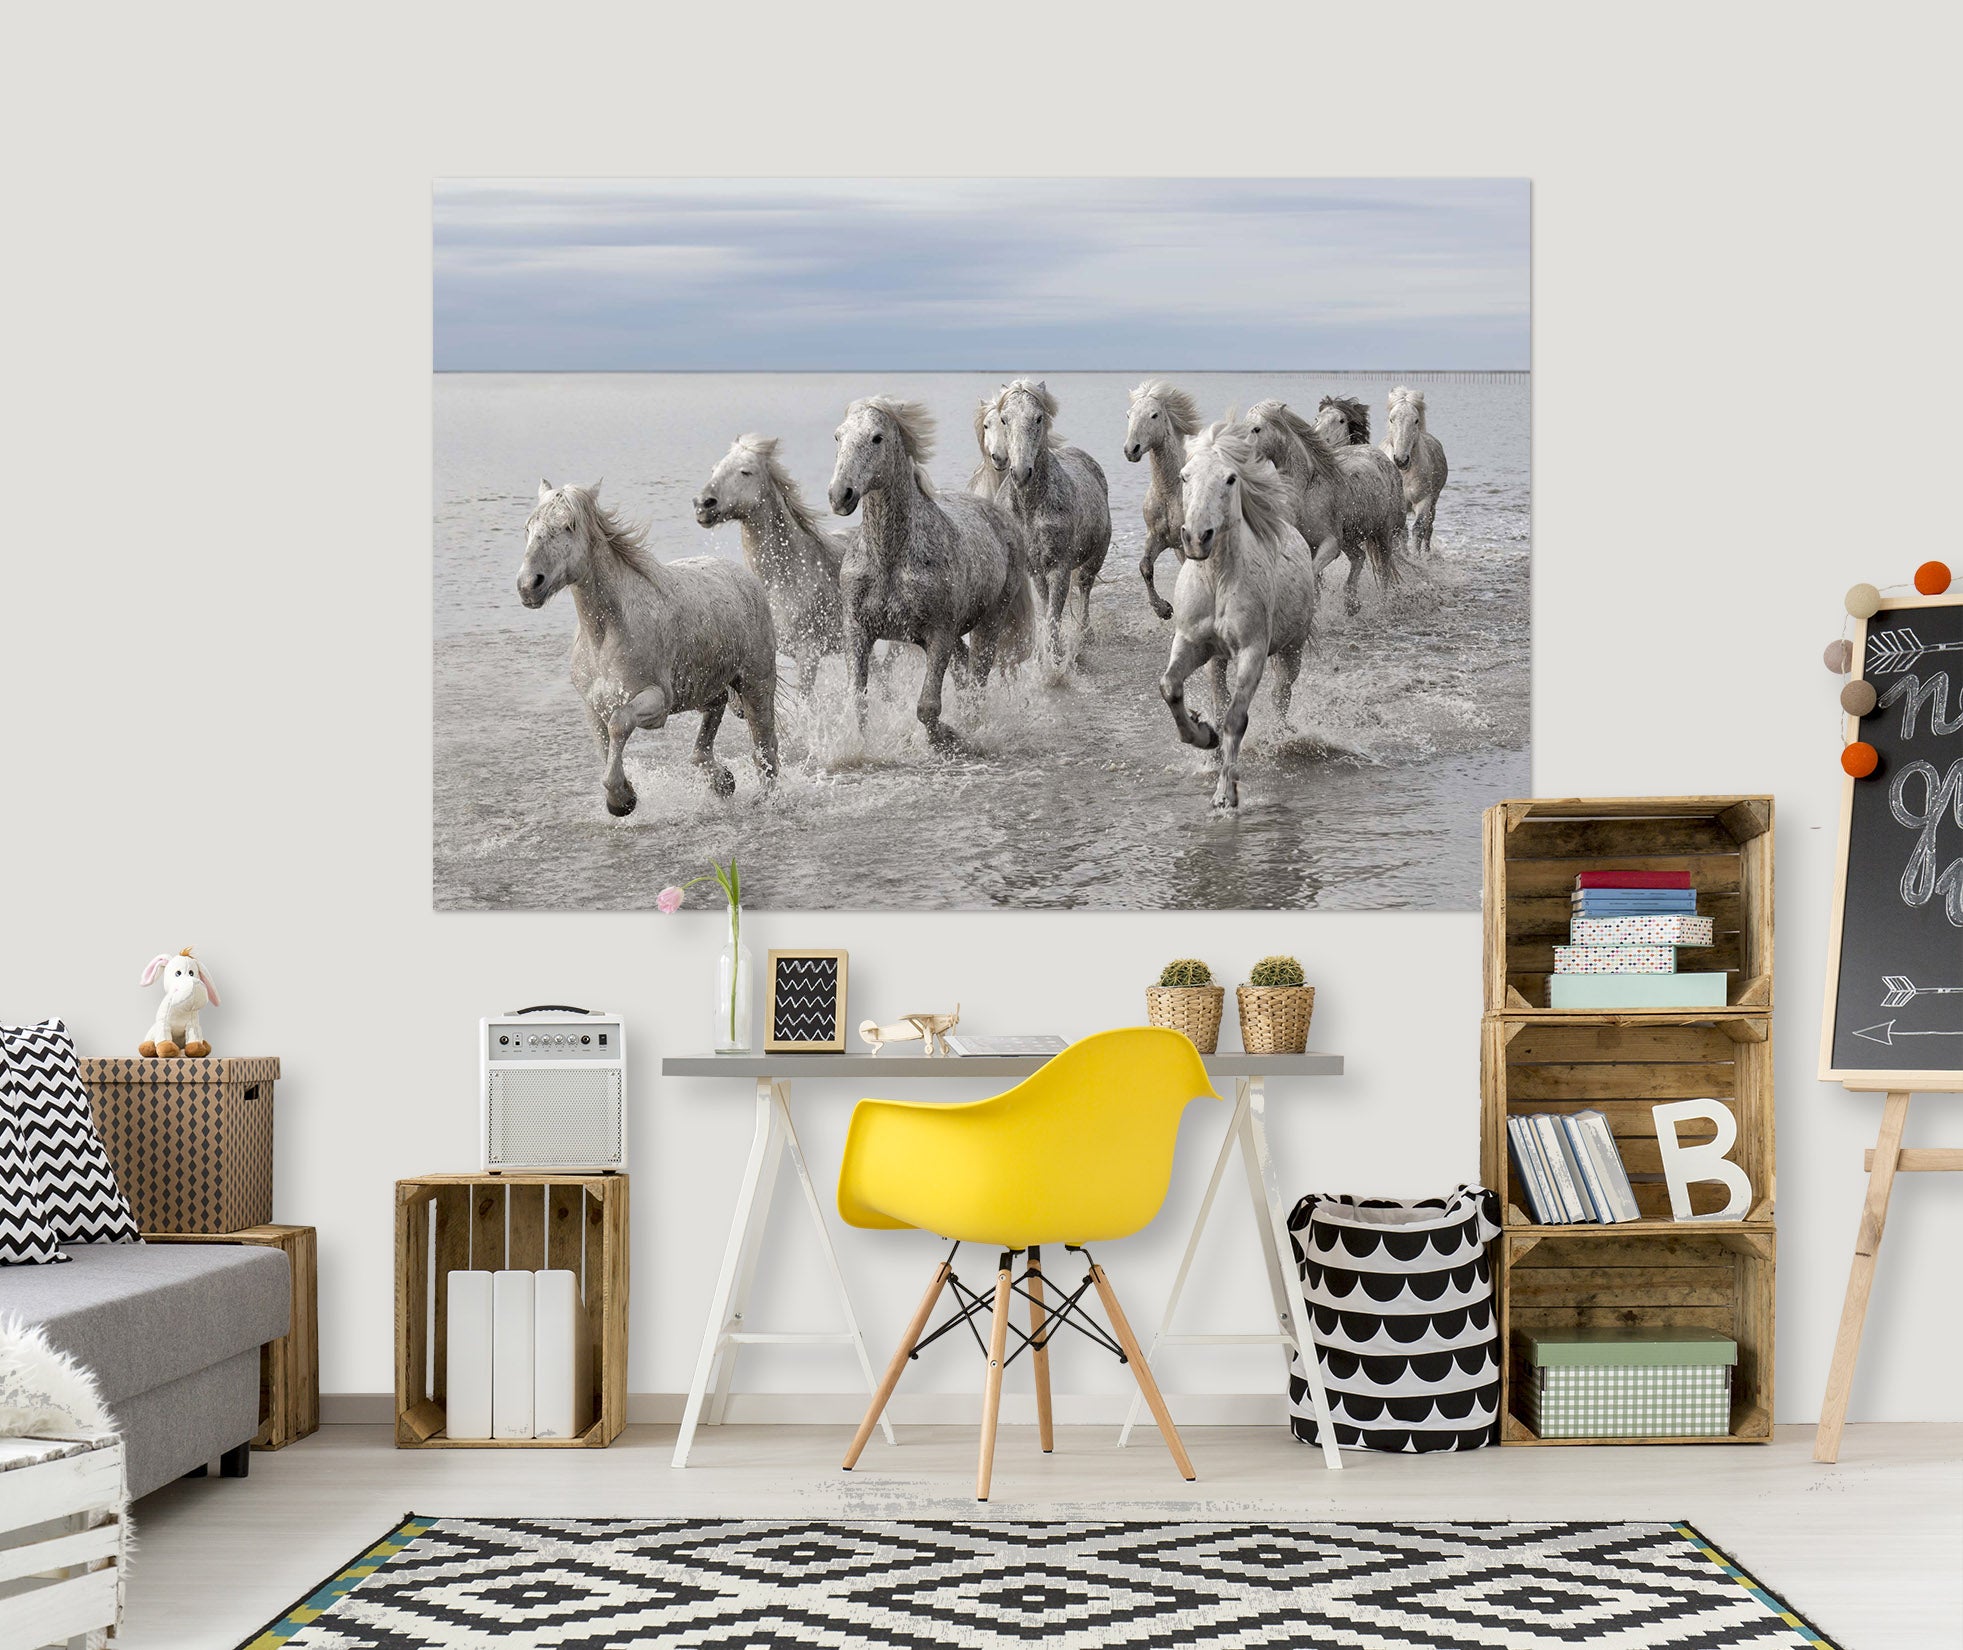 3D White Horse 199 Marco Carmassi Wall Sticker